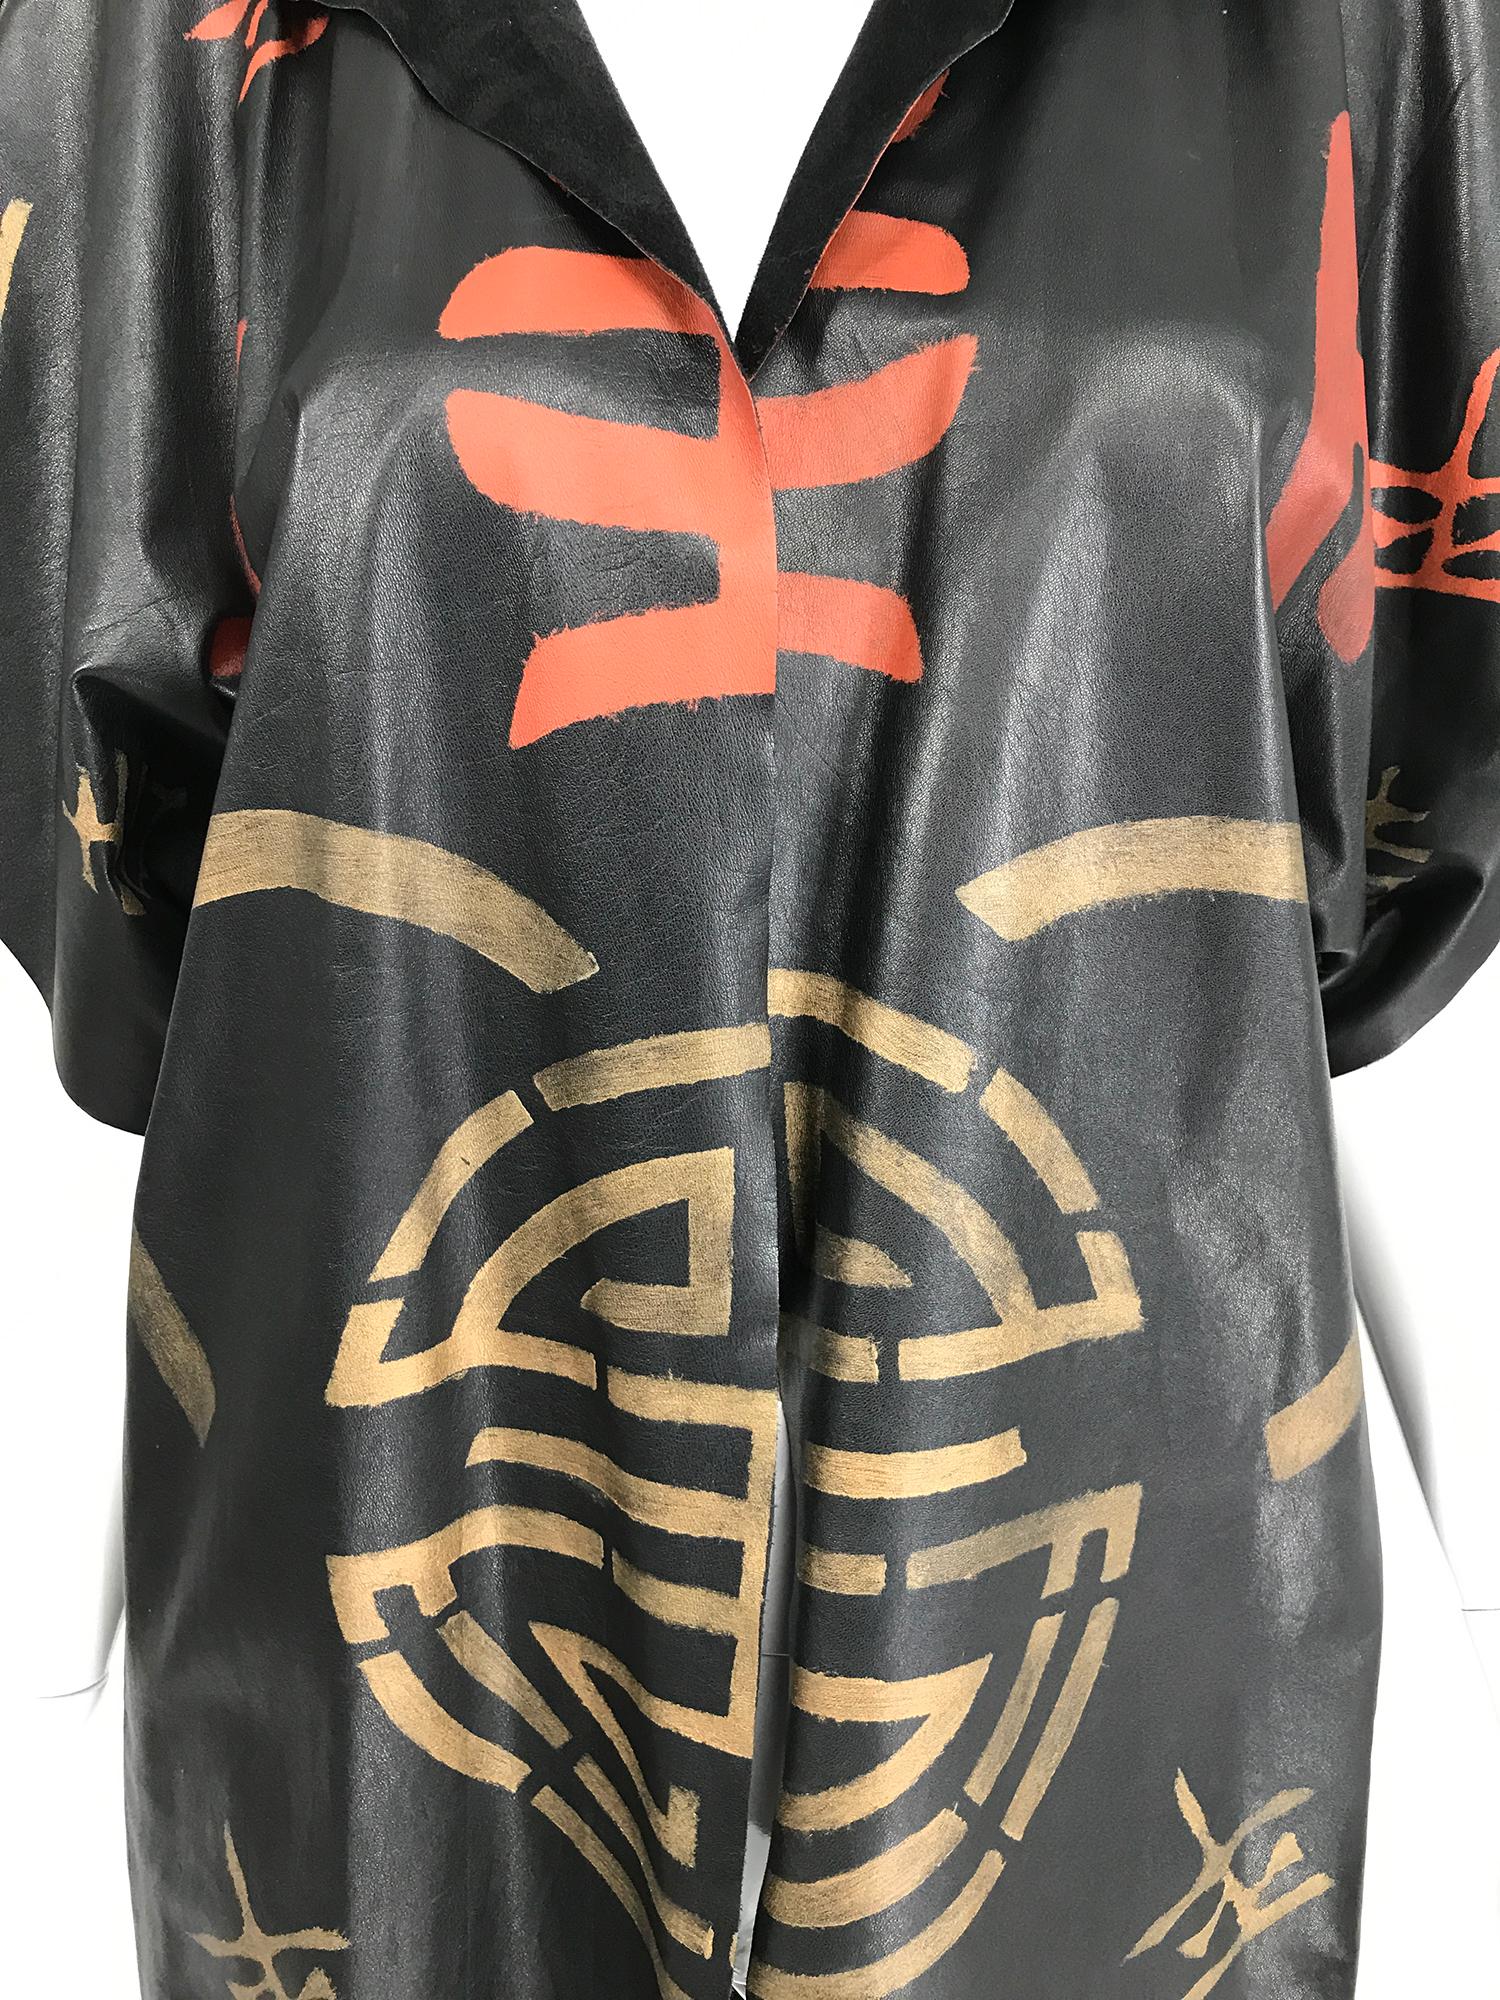 Lisandro Sarasola hand painted leather jacket from the 1980s. Black leather is painted in red and gold symbols front and back. Cap sleeves, open front without closures. Unlined. There is a single leather button on the left shoulder, for keeping your